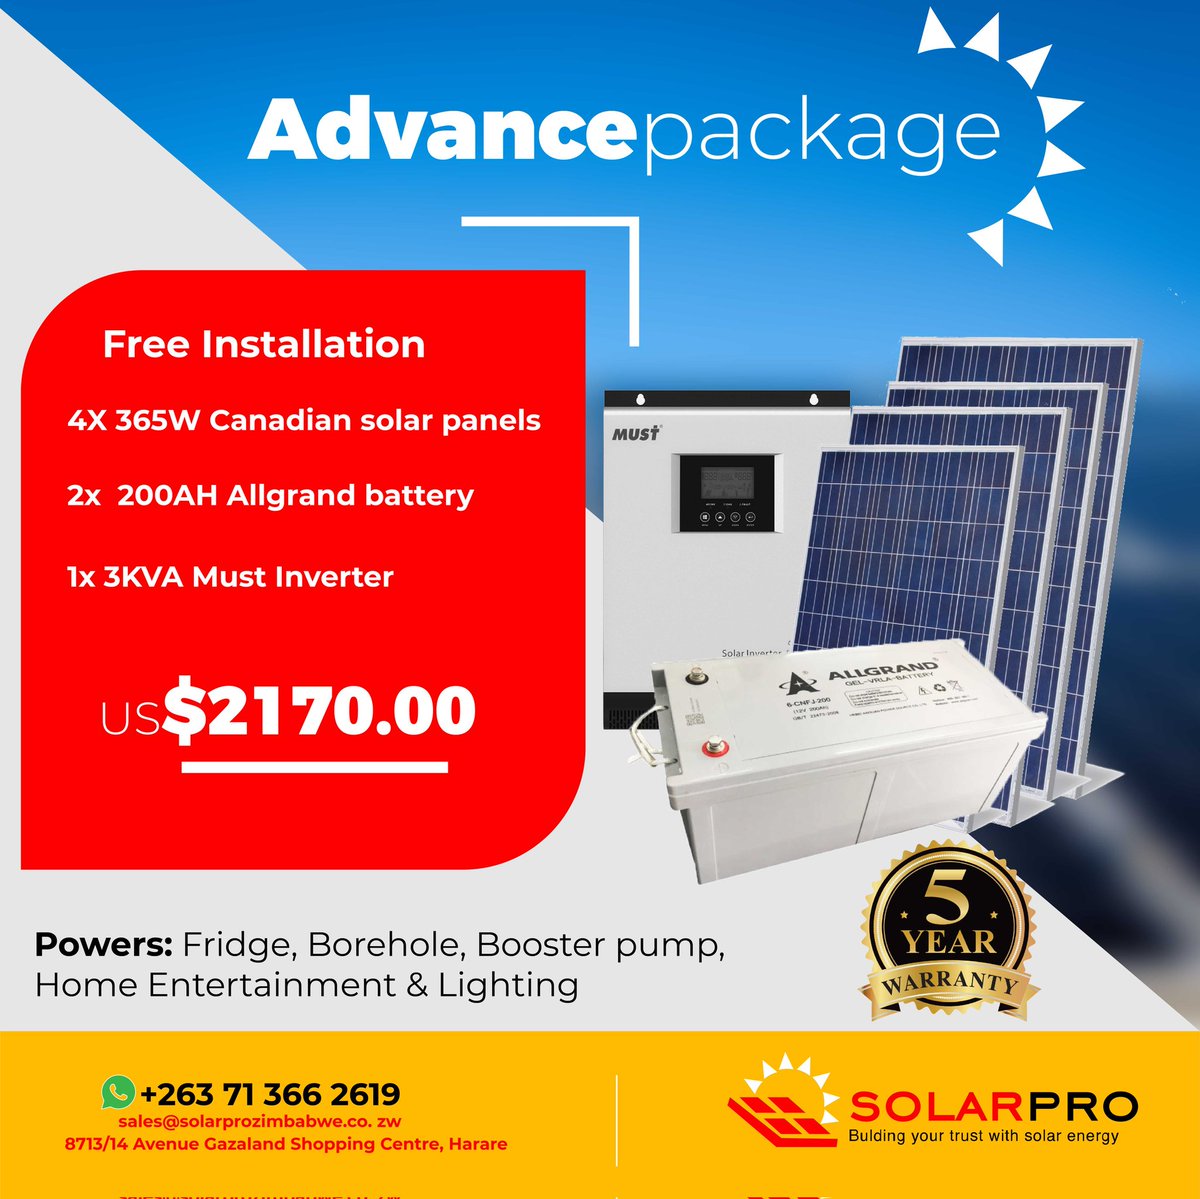 Are you slowed down by the amounts you have to pay for electricity? Break free of huge bills and produce your own electricity. For installation or consultation call/Whatsapp +263713662619

#SolarProZimbabwe #solar #solarsystem #solarenergy #solarpanel #solarpower #solarrooftop